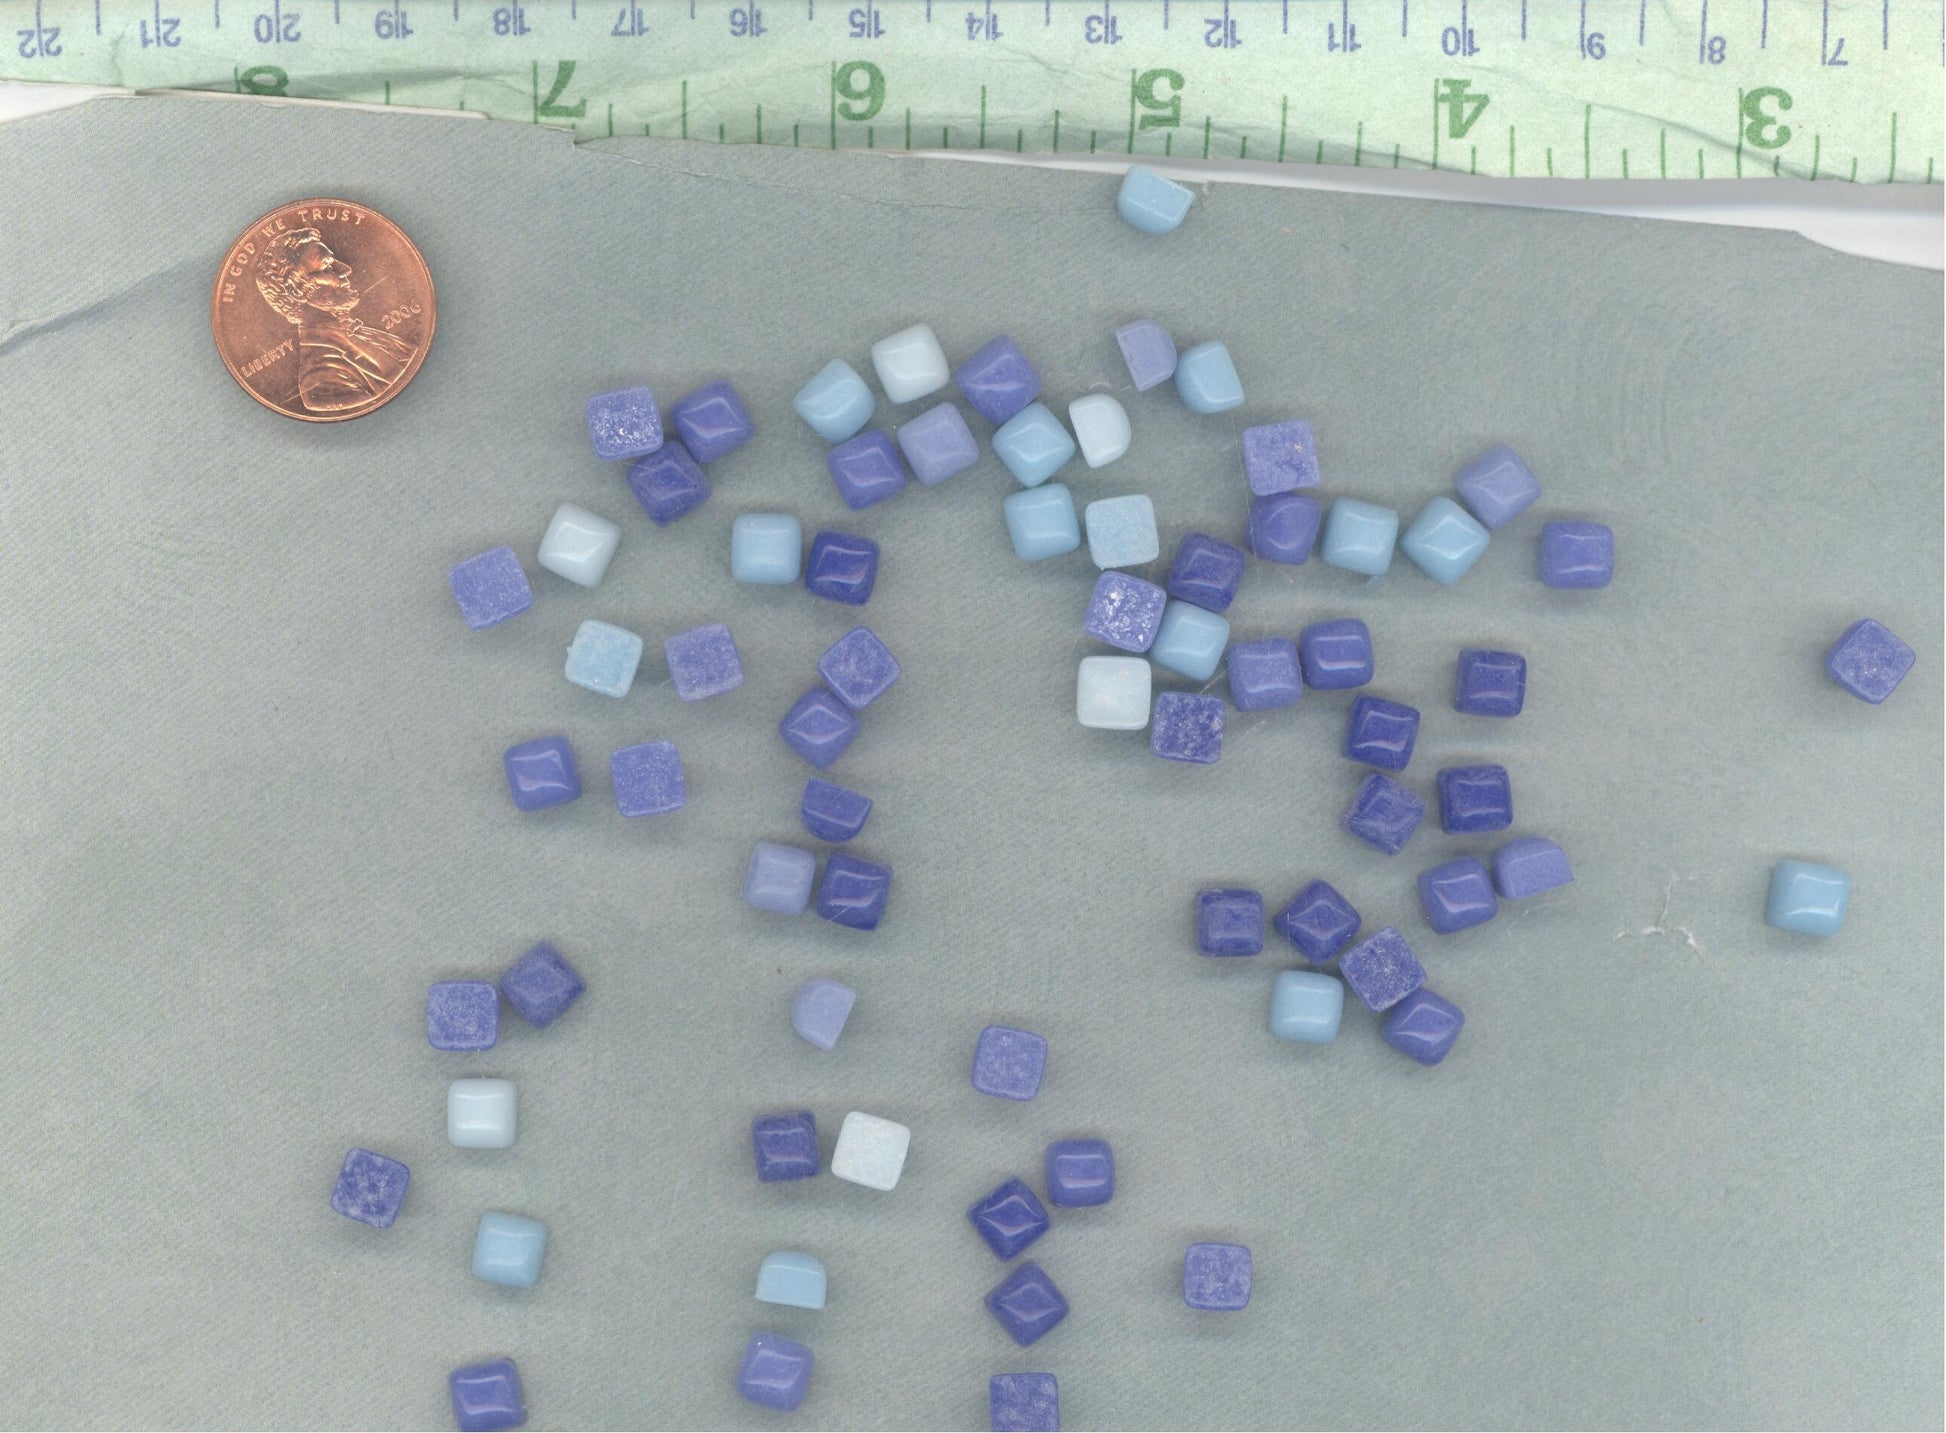 Out of the Blue Mix TINY Glass Tiles - 6mm Mini Mosaic Tiles - 100 Square with Domed Top - Use for Mosaic Jewelry Crystal